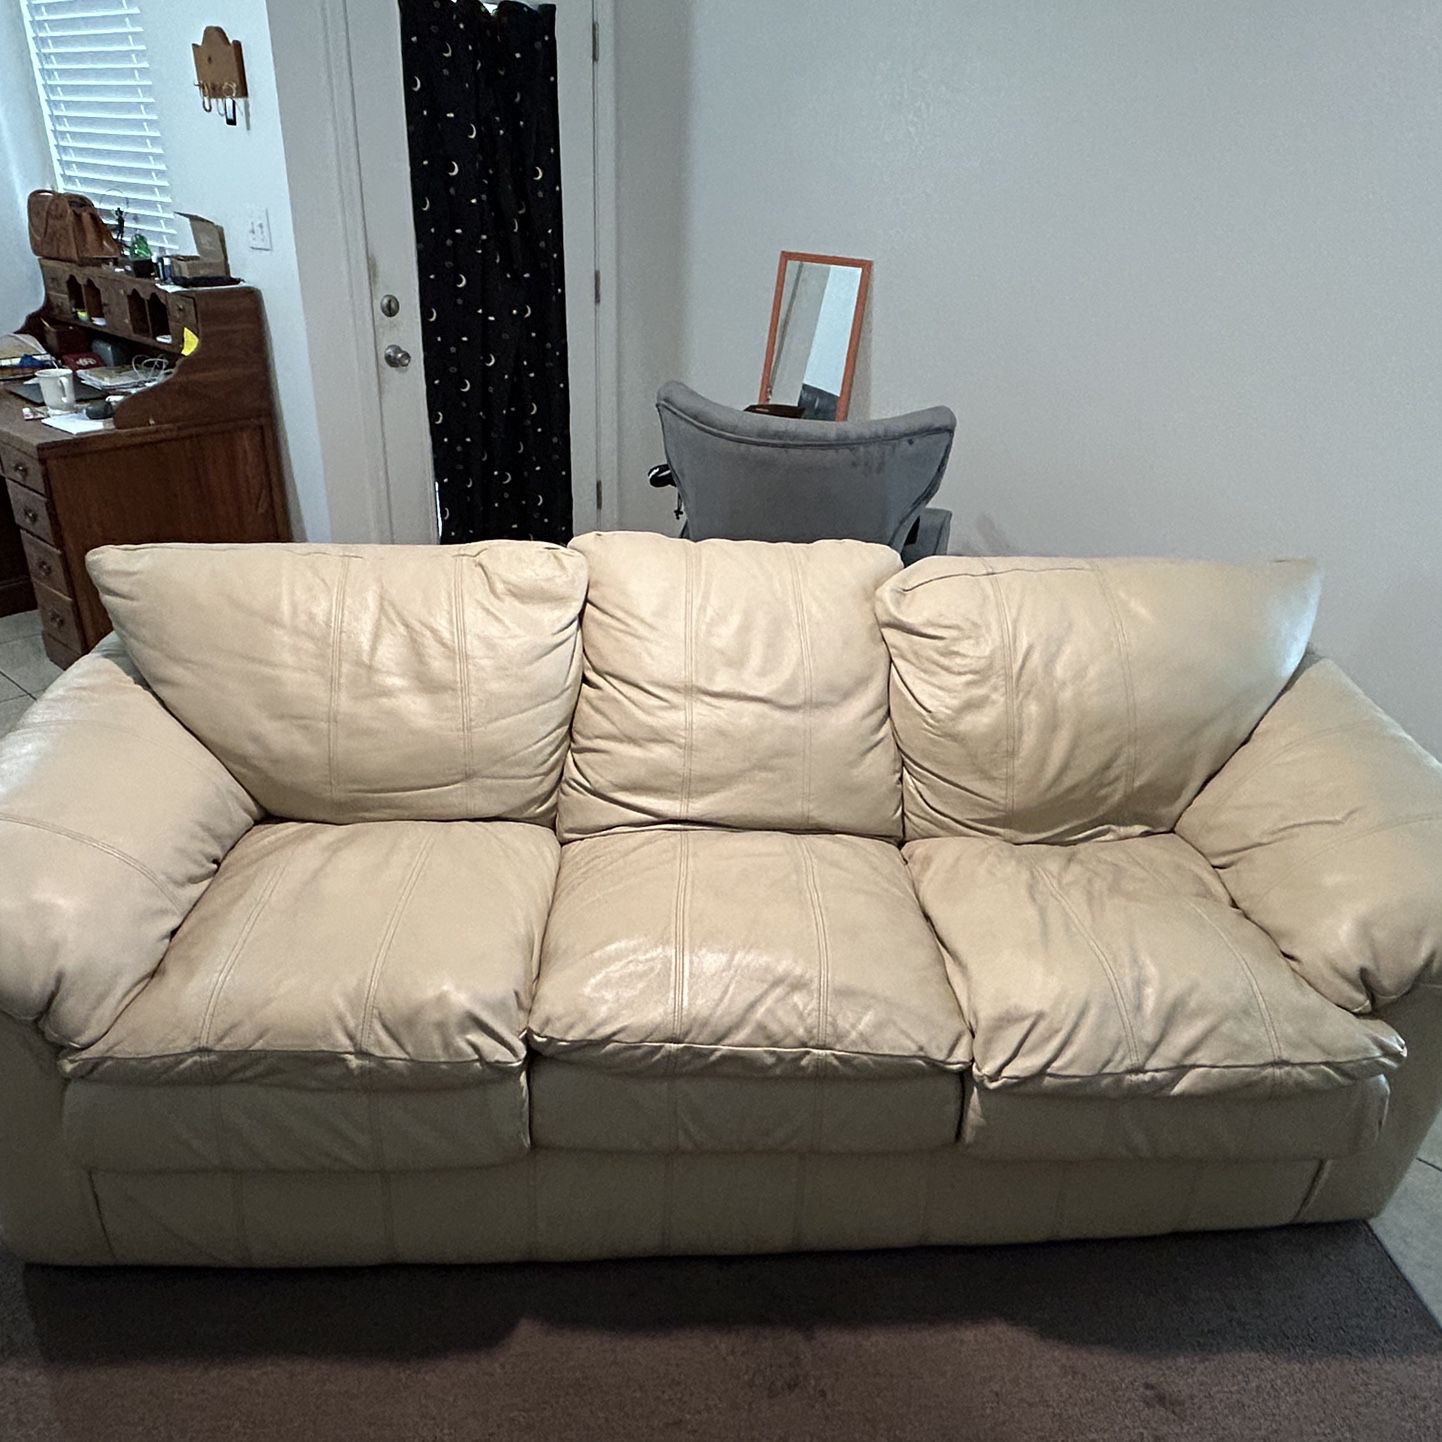 Leather Sofa - 3 Seats, Extremely Comfortable!